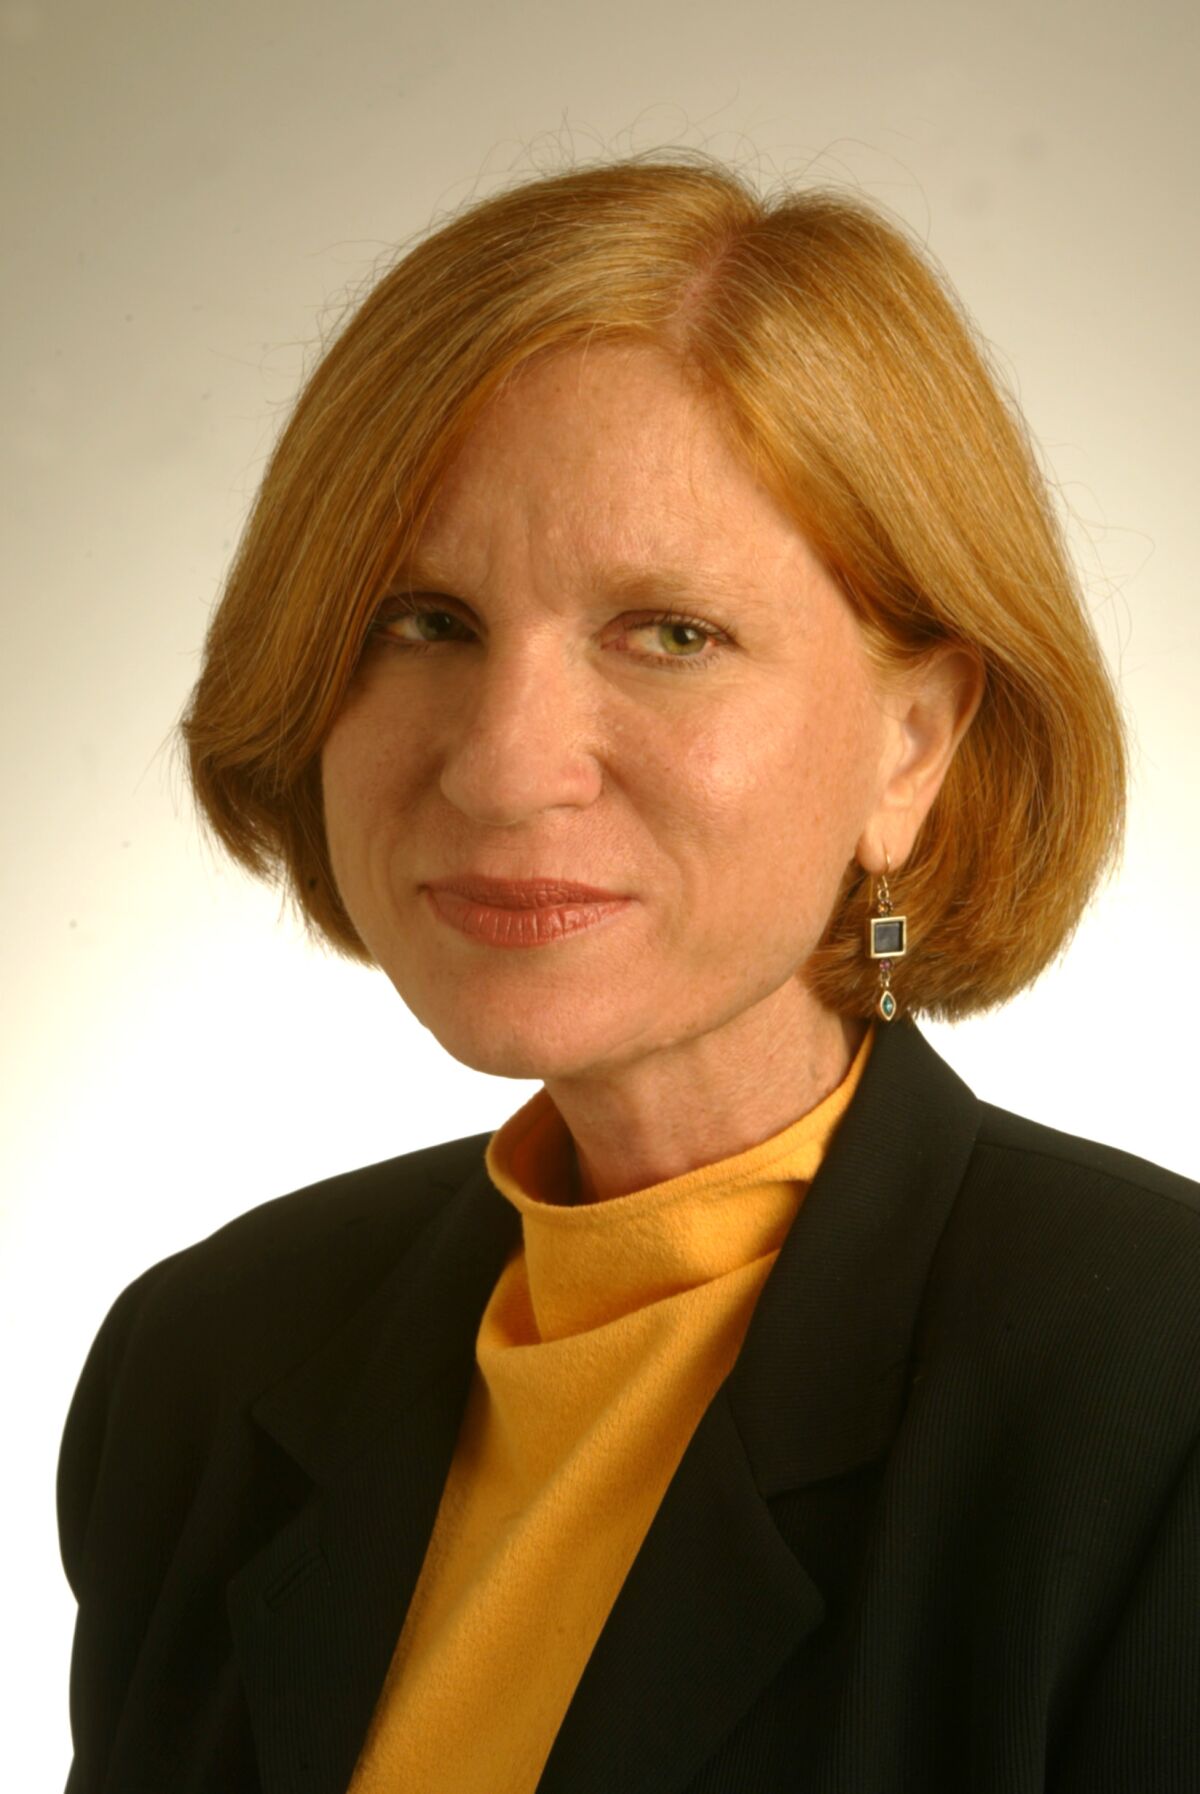 A headshot of a woman with a sleek bobbed haircut, in a blue blazer and high-neck gold shirt.